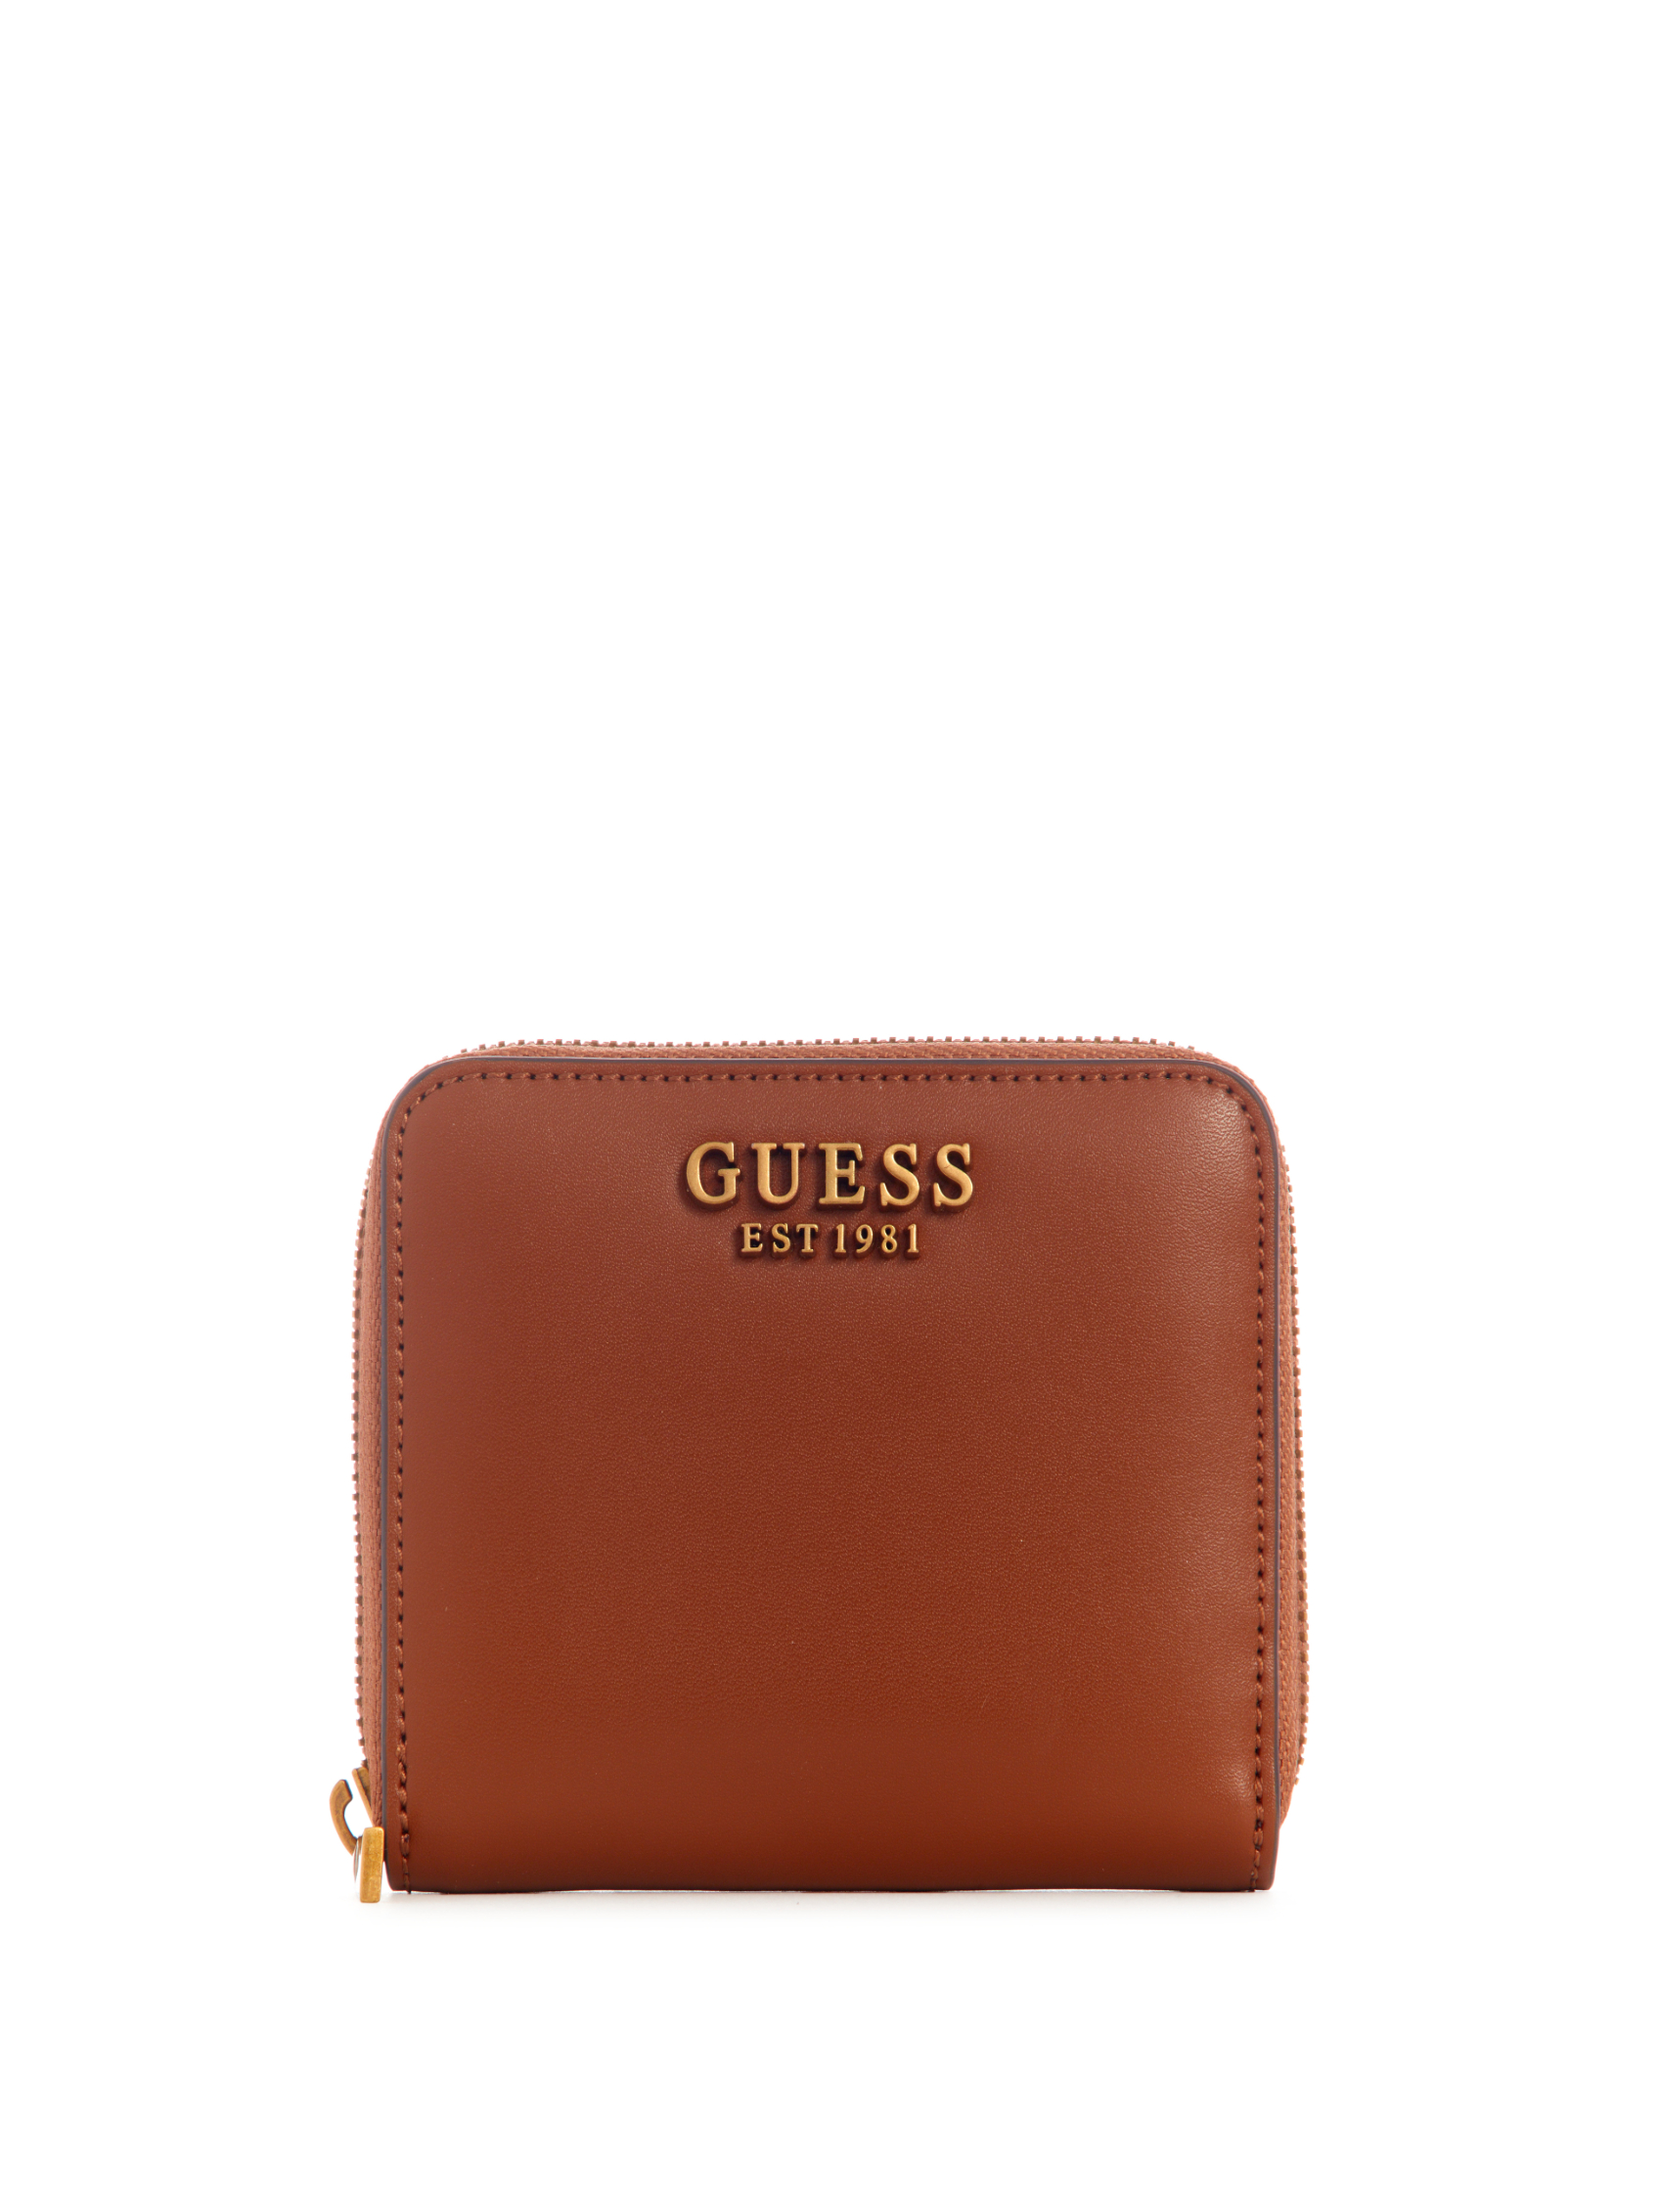 LAUREL SLING SMALL ZIP AROUND | Guess Philippines